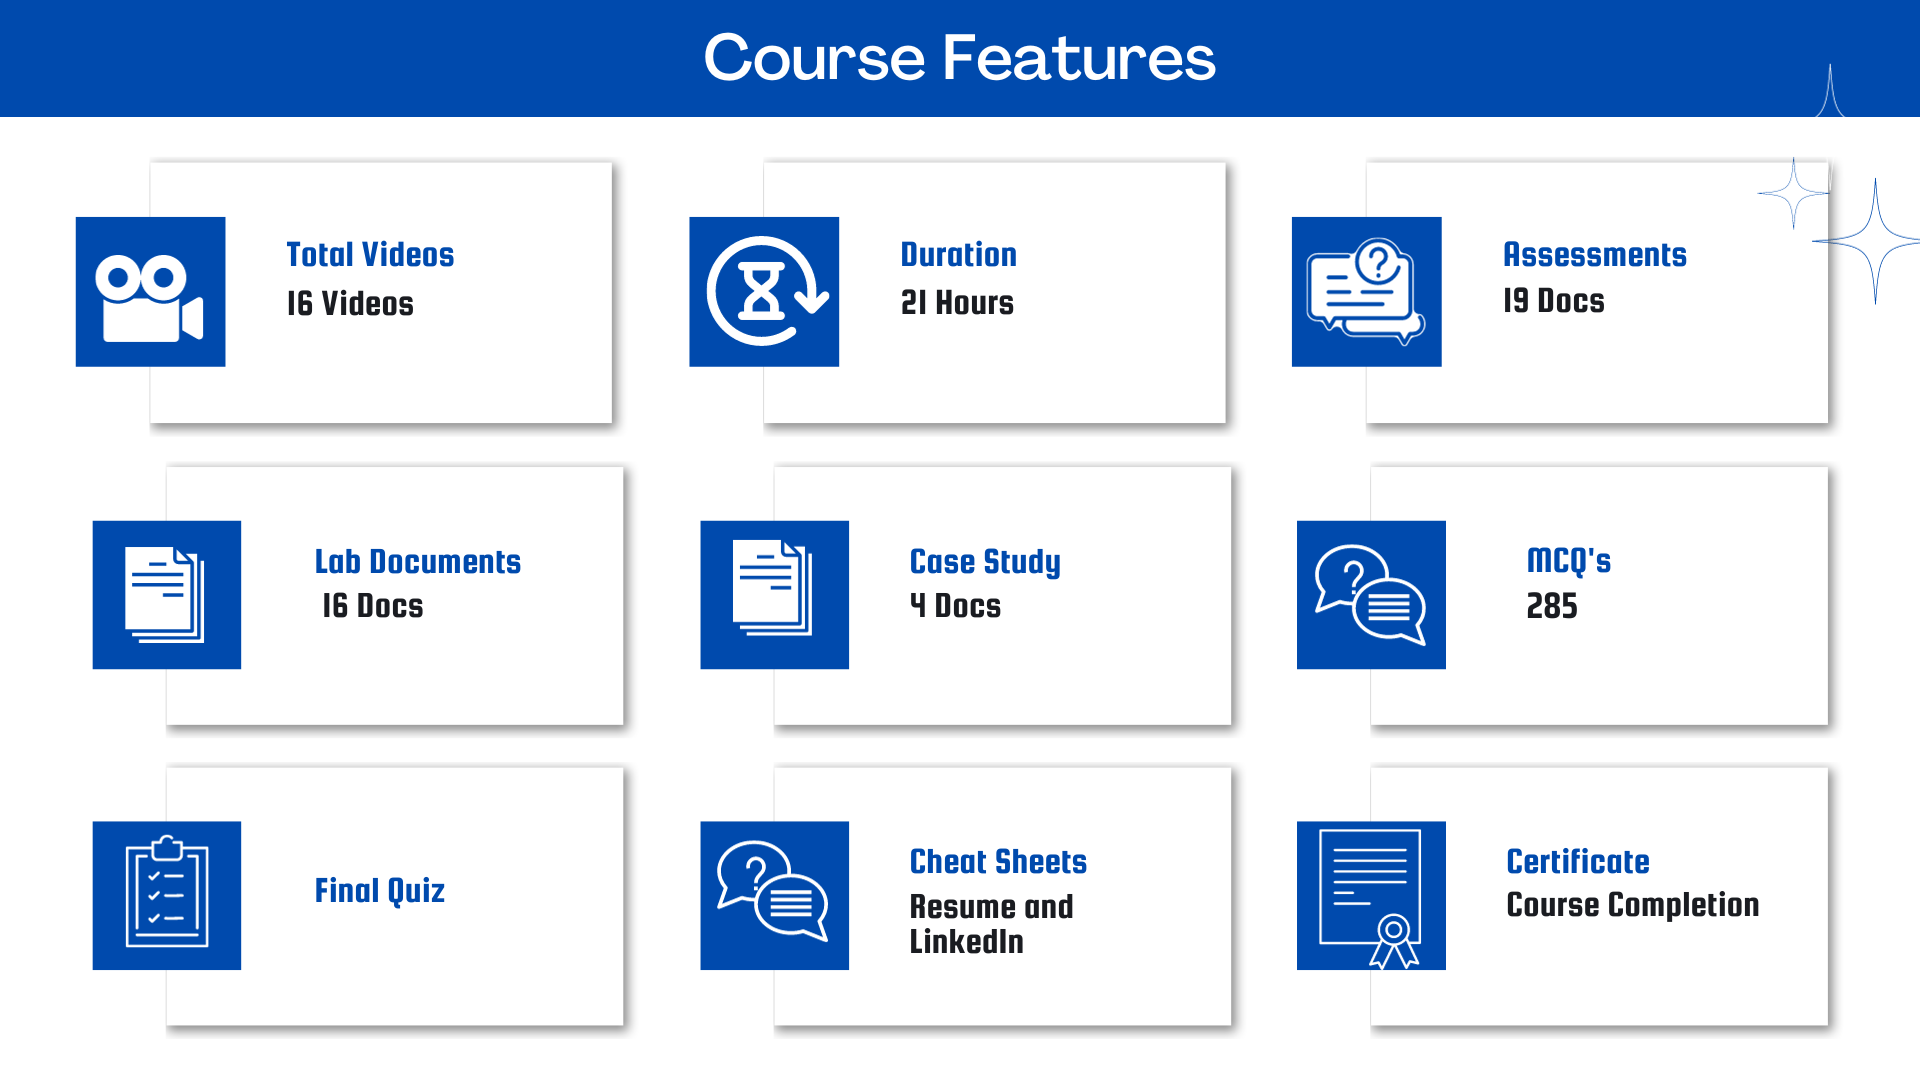 Workday Integration- Advanced Studio - Advanced Reporting Course Features